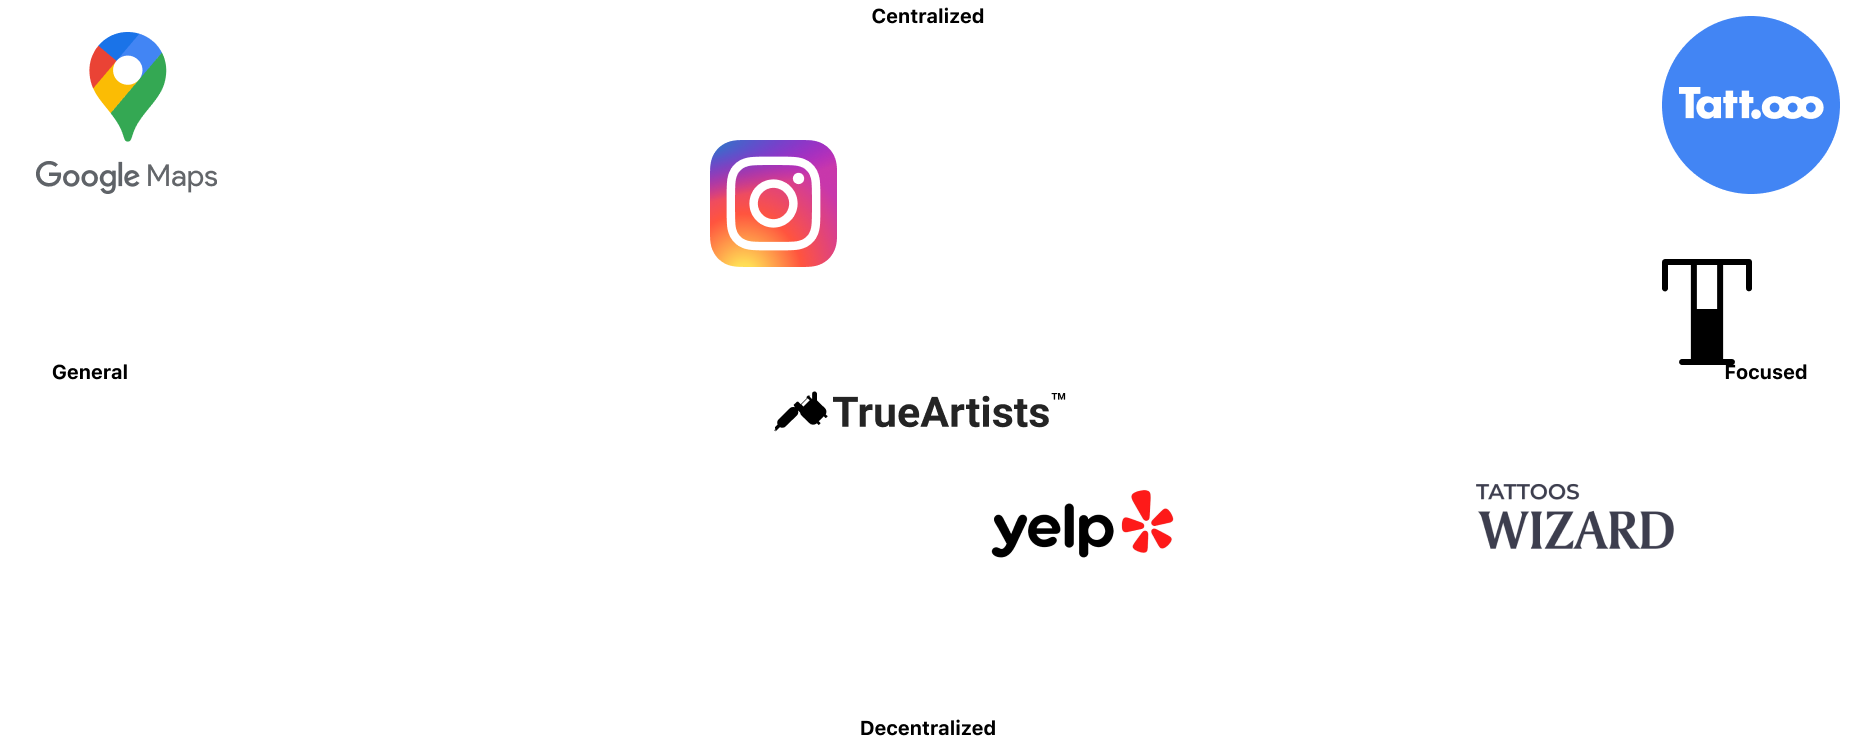 A competitive positioning matrix showing how different, competing platforms fare in terms of being a focused or centralized platform for tattoo enthusiasts and artists.